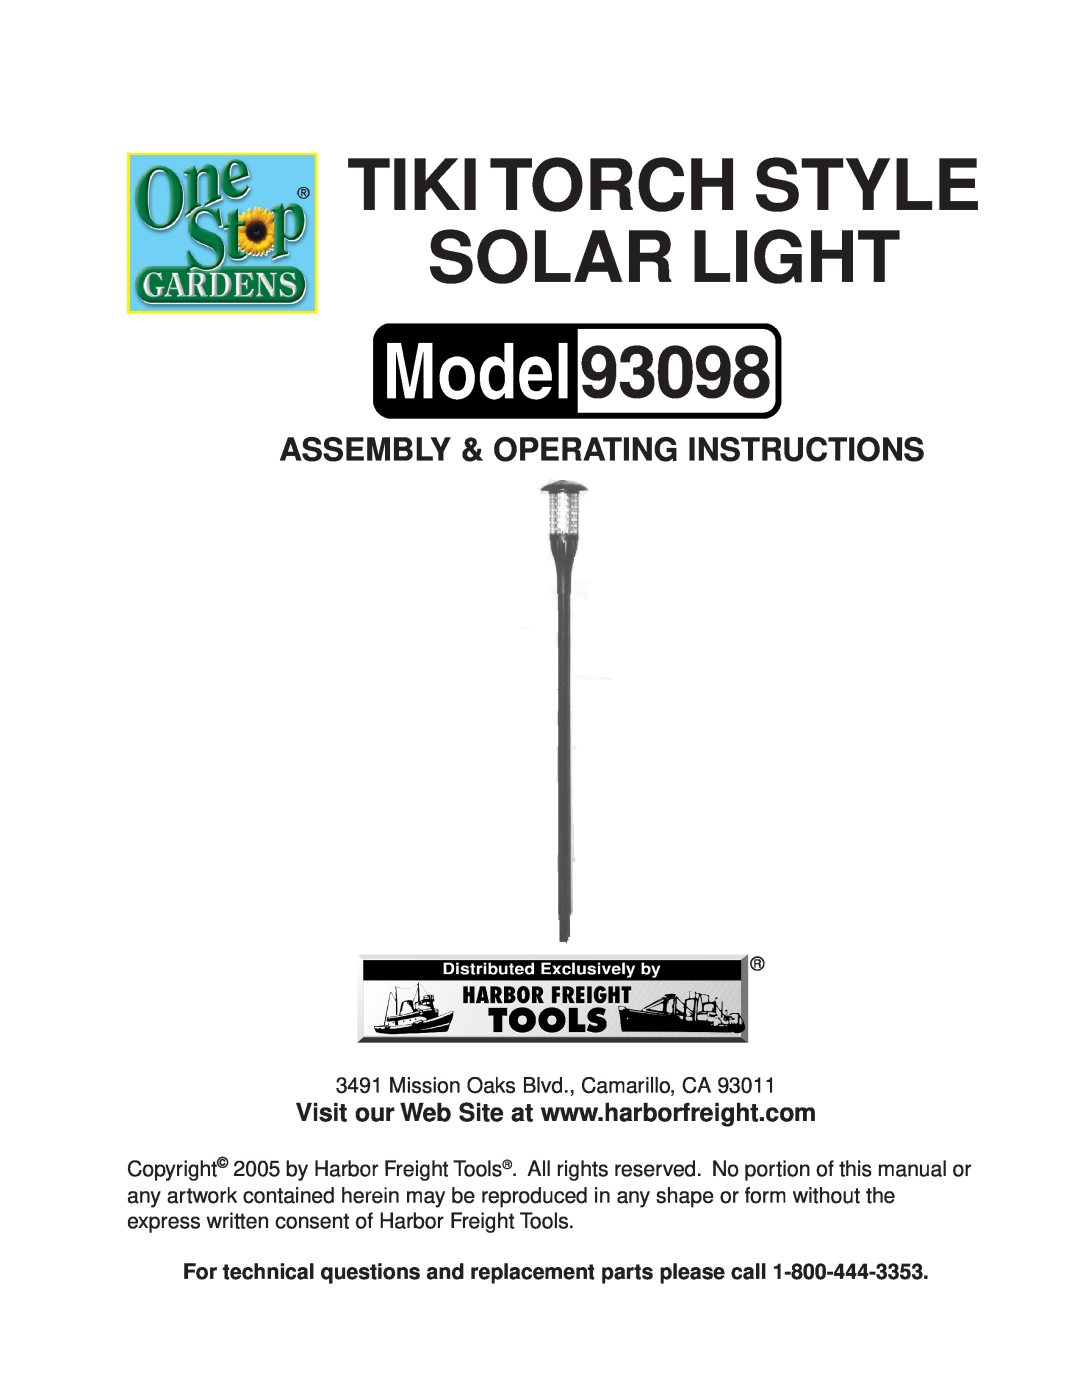 Harbor Freight Tools manual TIKI TORCH STYLE SOLAR LIGHT 93098, Assembly & Operating Instructions 